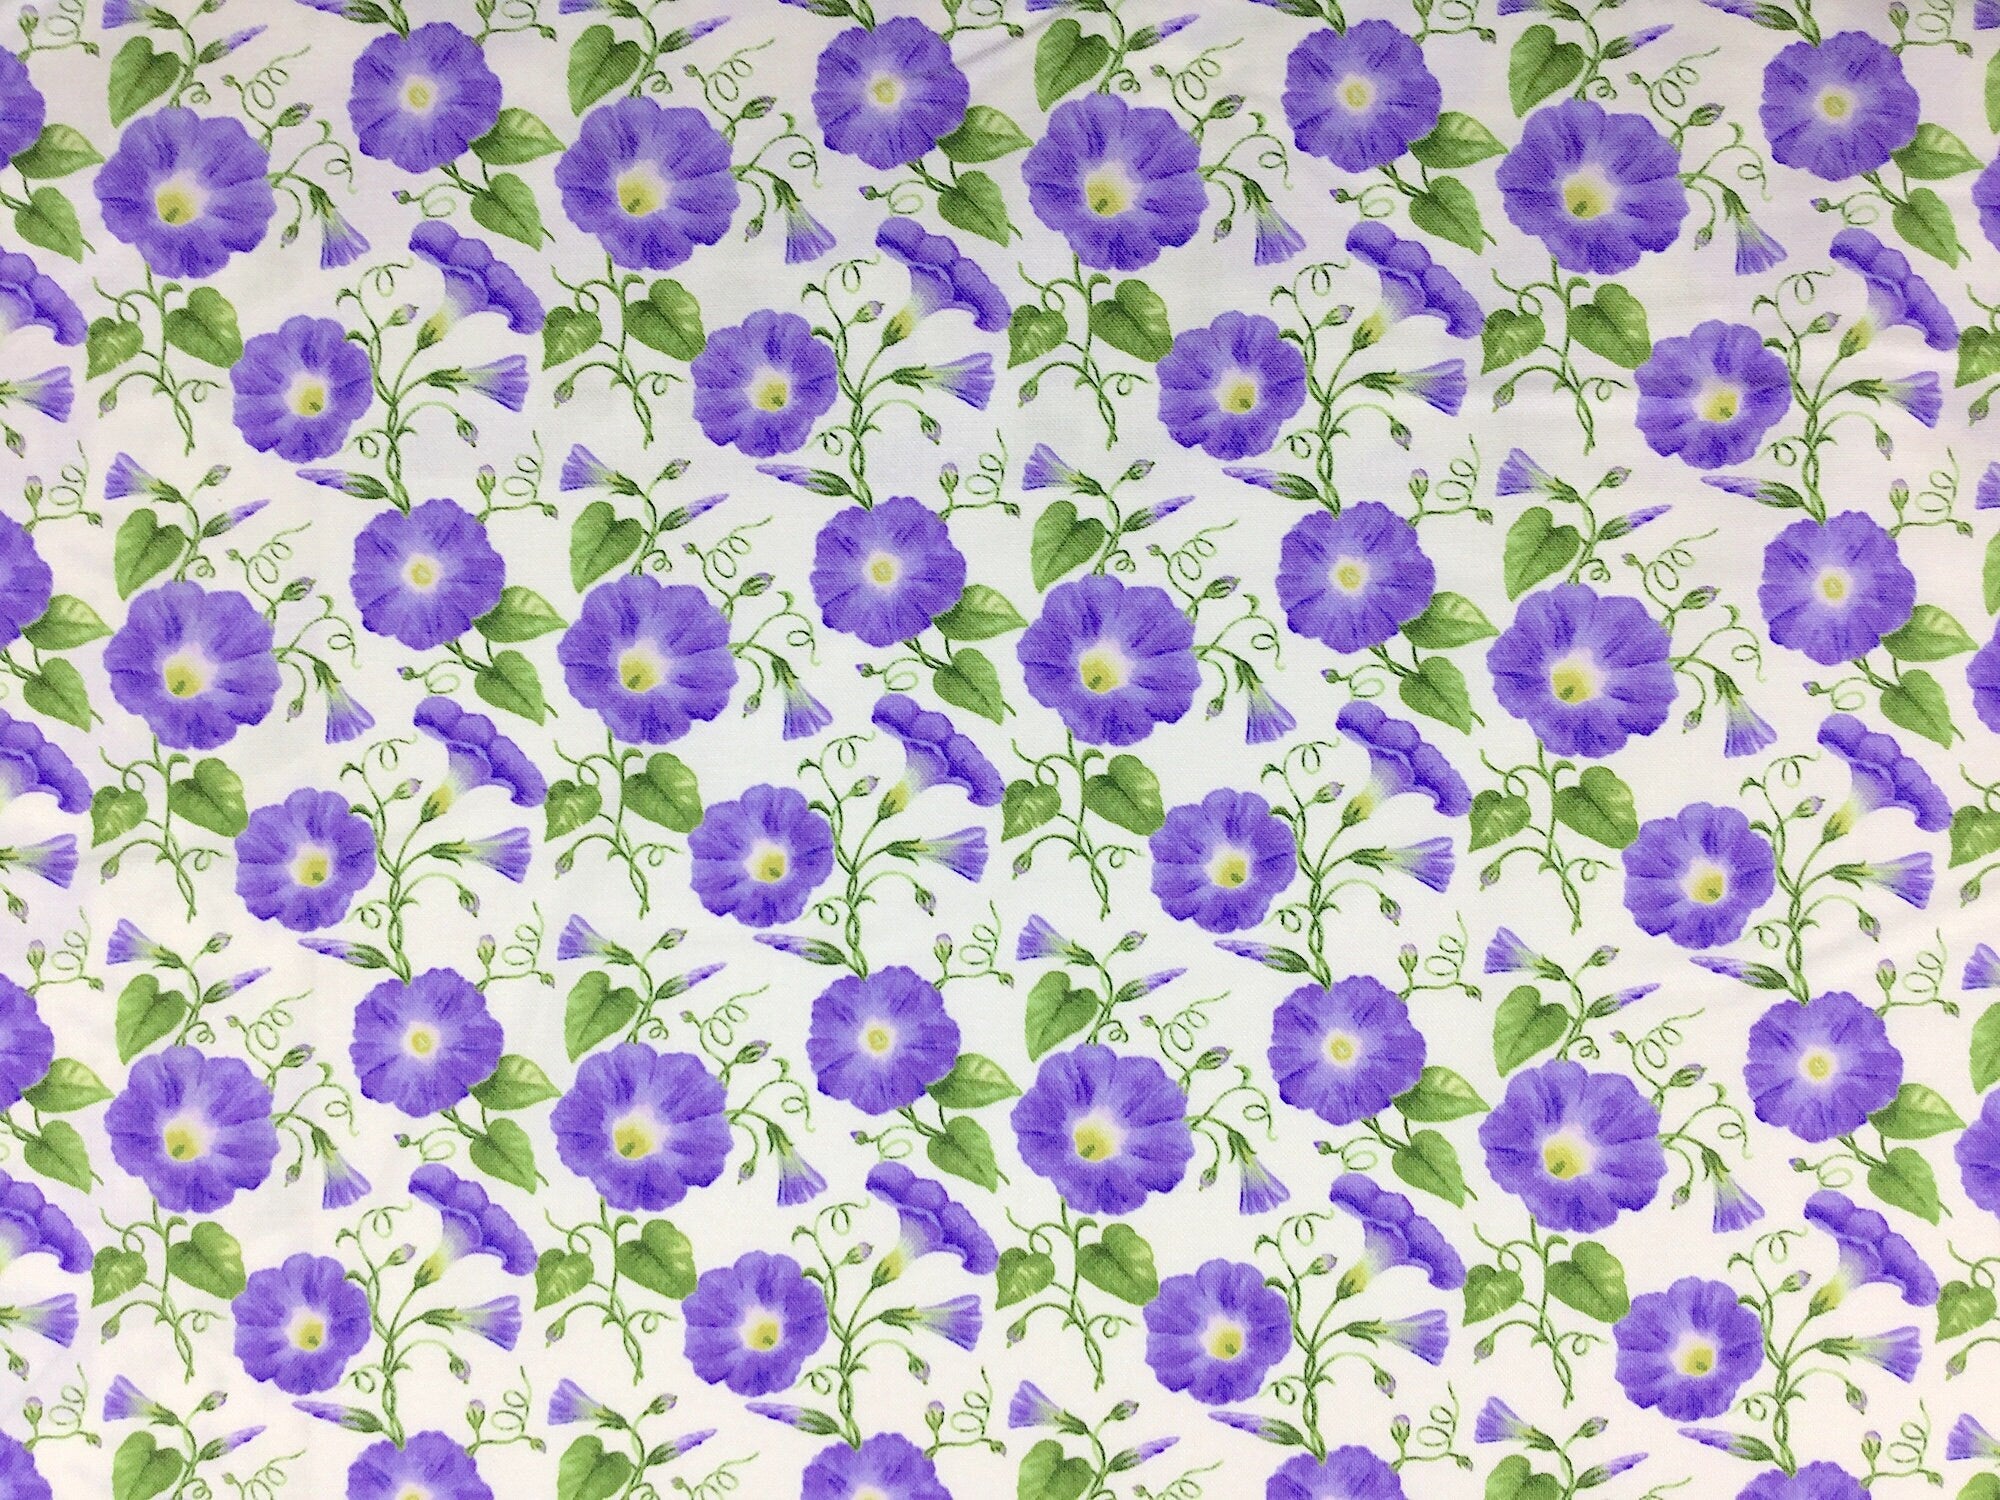 This fabric is part of the Hydrangea Birdsong Collection. This white fabric is covered with Morning Glory flowers.